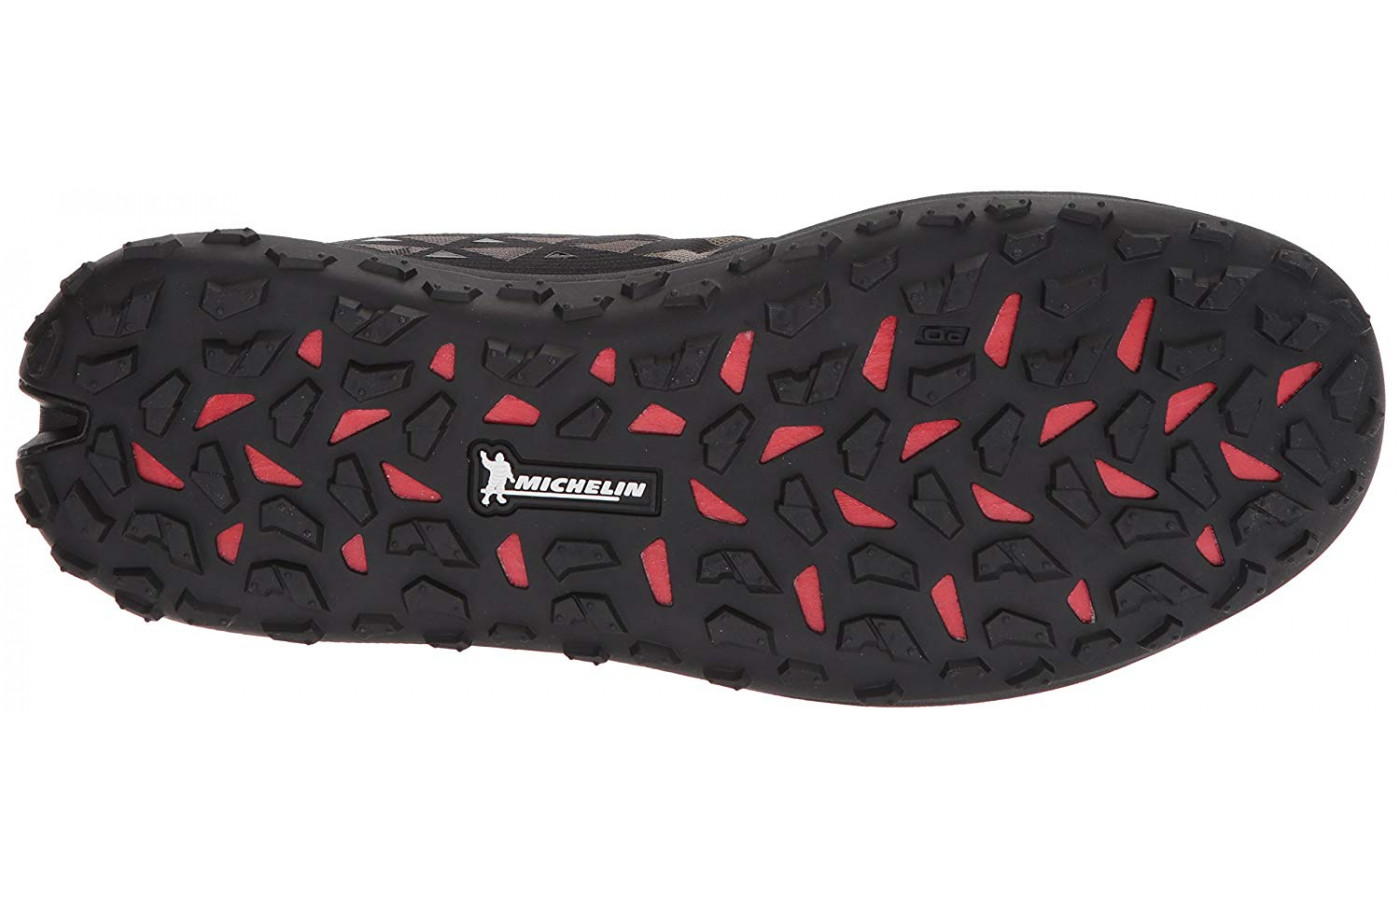 The sole of the Under Armour Fat Tire 2 provides excellent traction